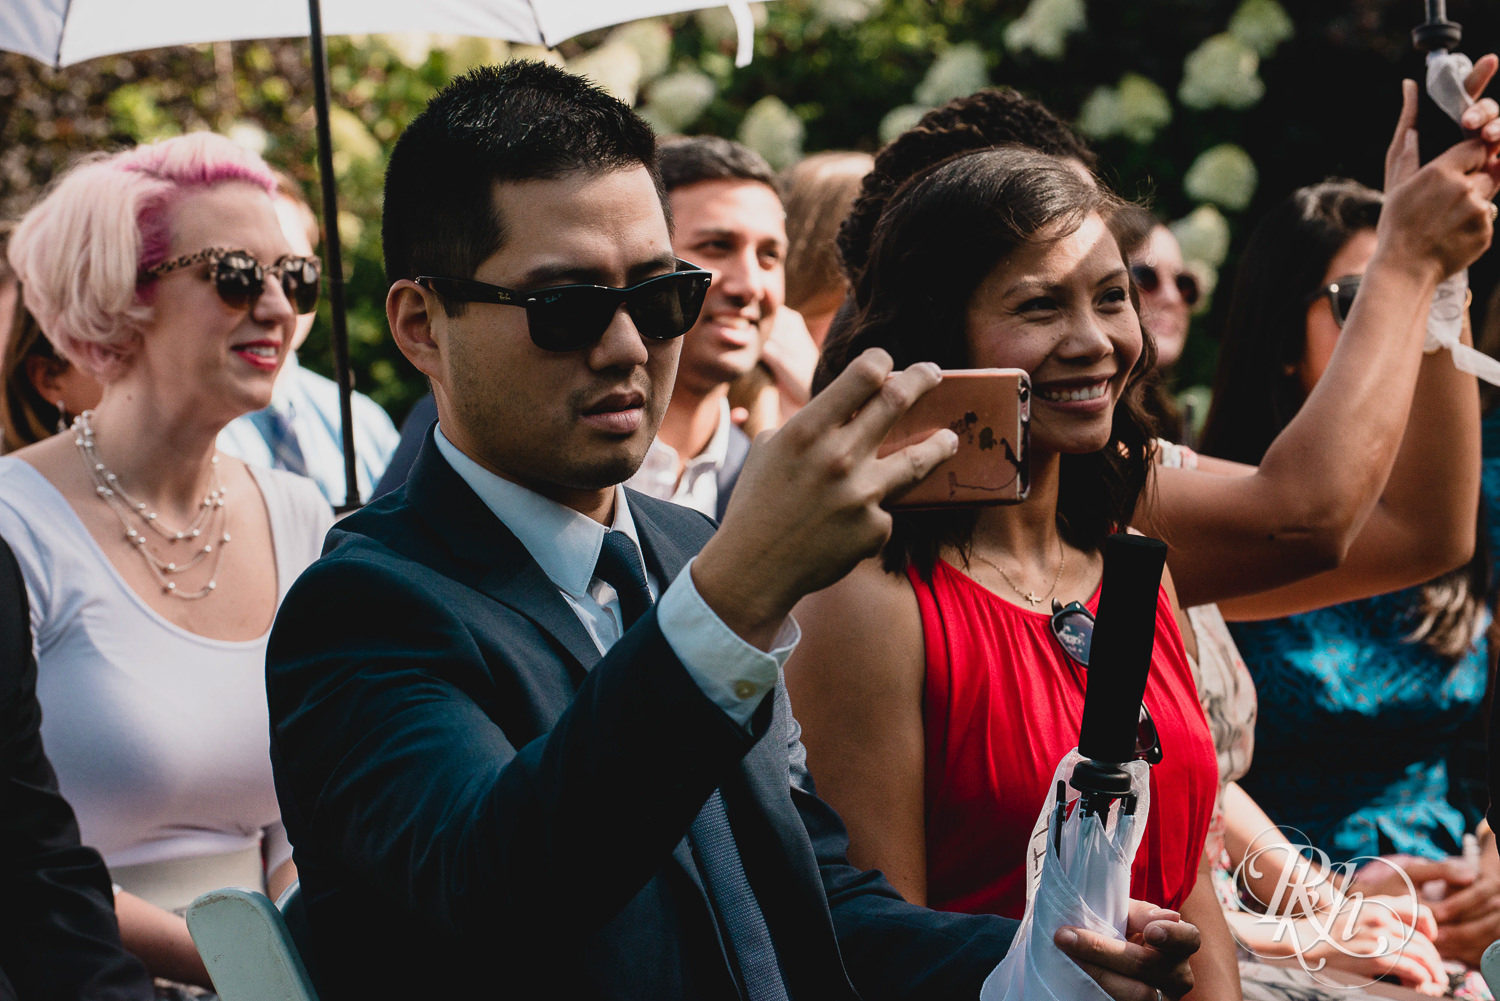 Guests take photos with iPhone during wedding ceremony at Camrose Hill Flower Farm in Stillwater, Minnesota.